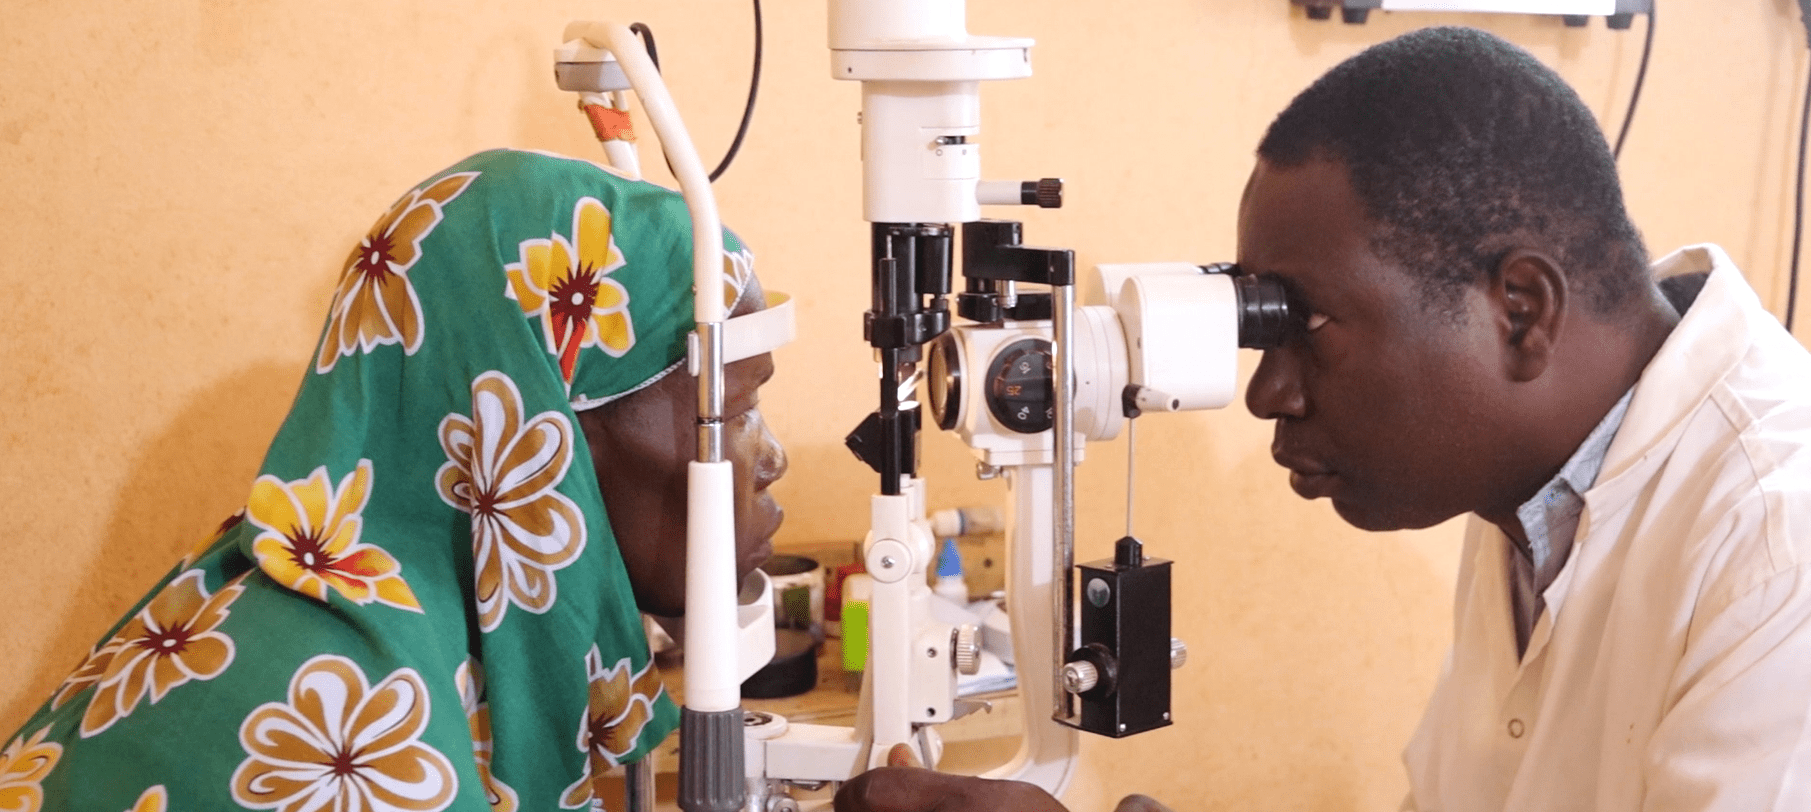 A woman wearing a headscarf with a flower pattern has her eyes examined by a healthcare worker.